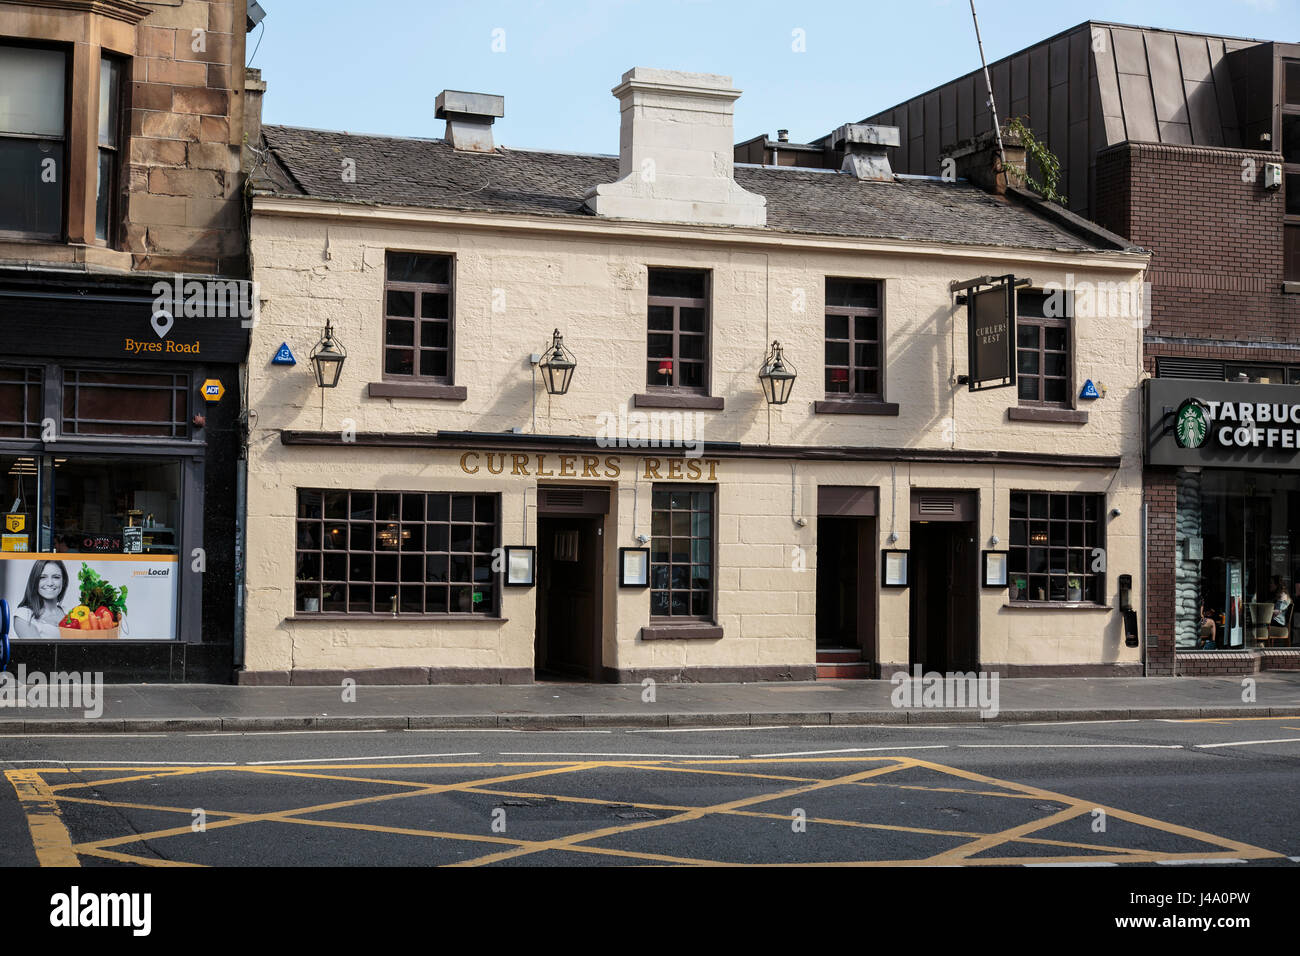 One of the most famous pubs in Glasgow, the Curlers Rest found halfway down Byres Road in the West End of the city. Stock Photo